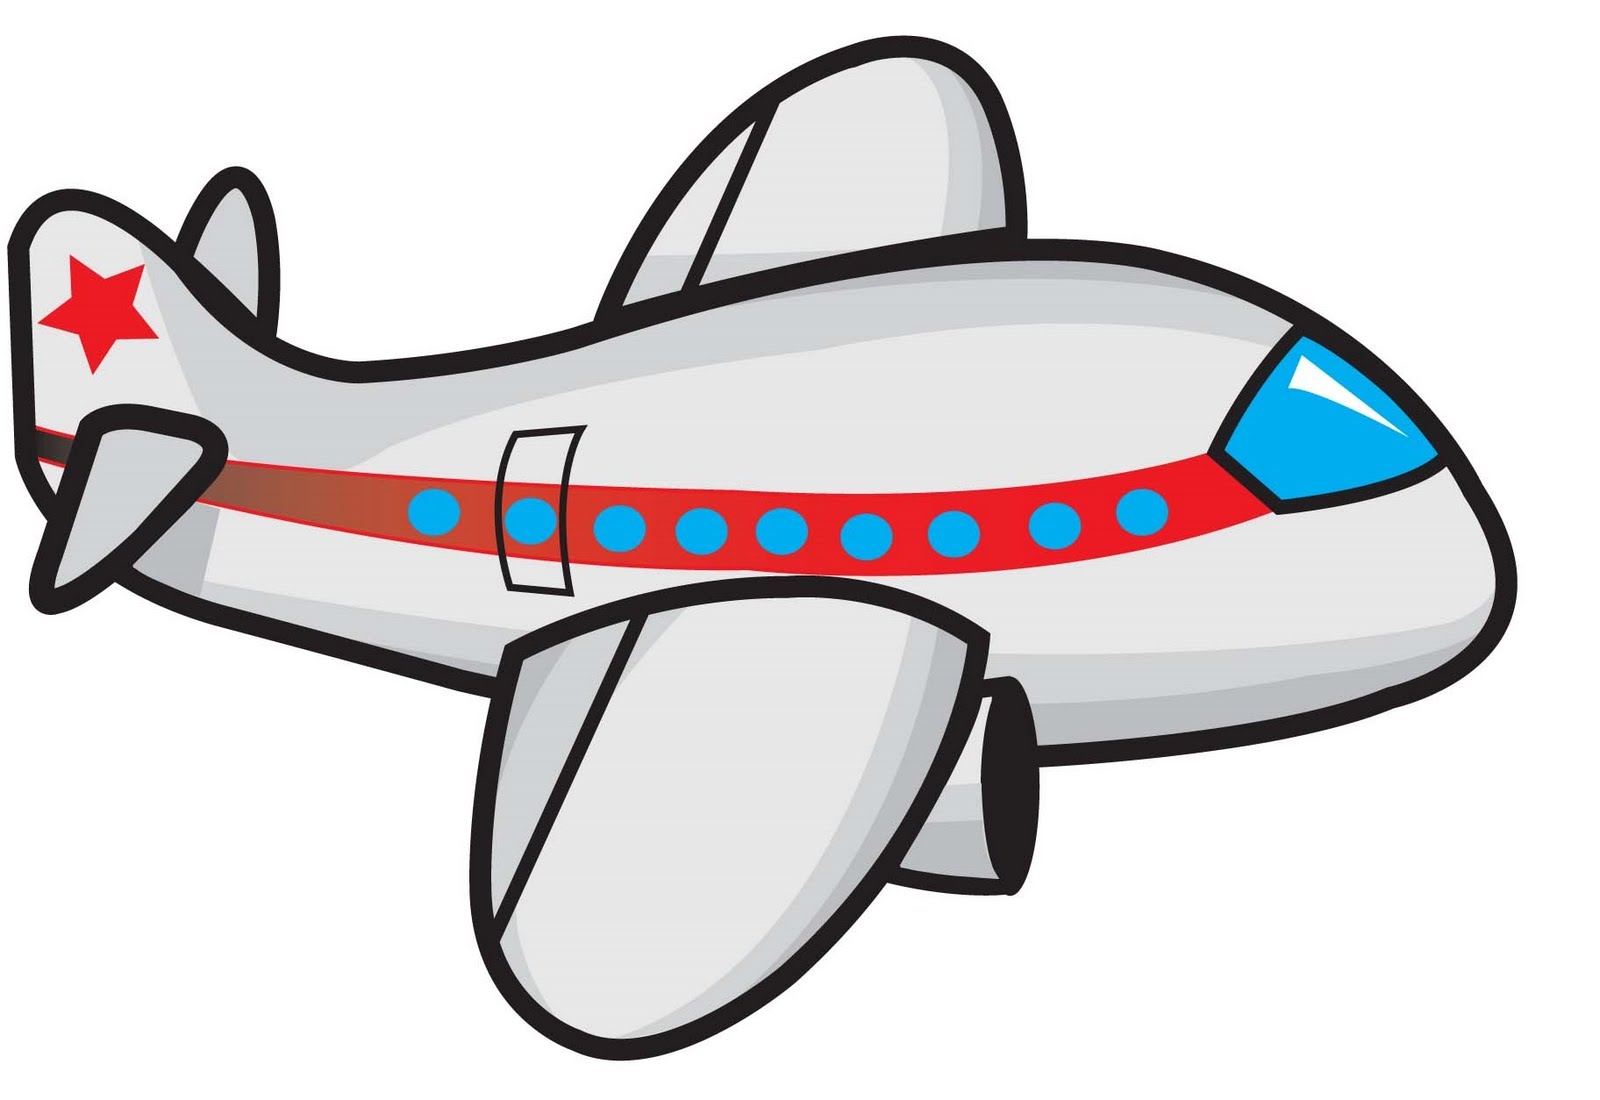 Free Animated Plane Cliparts, Download Free Clip Art, Free